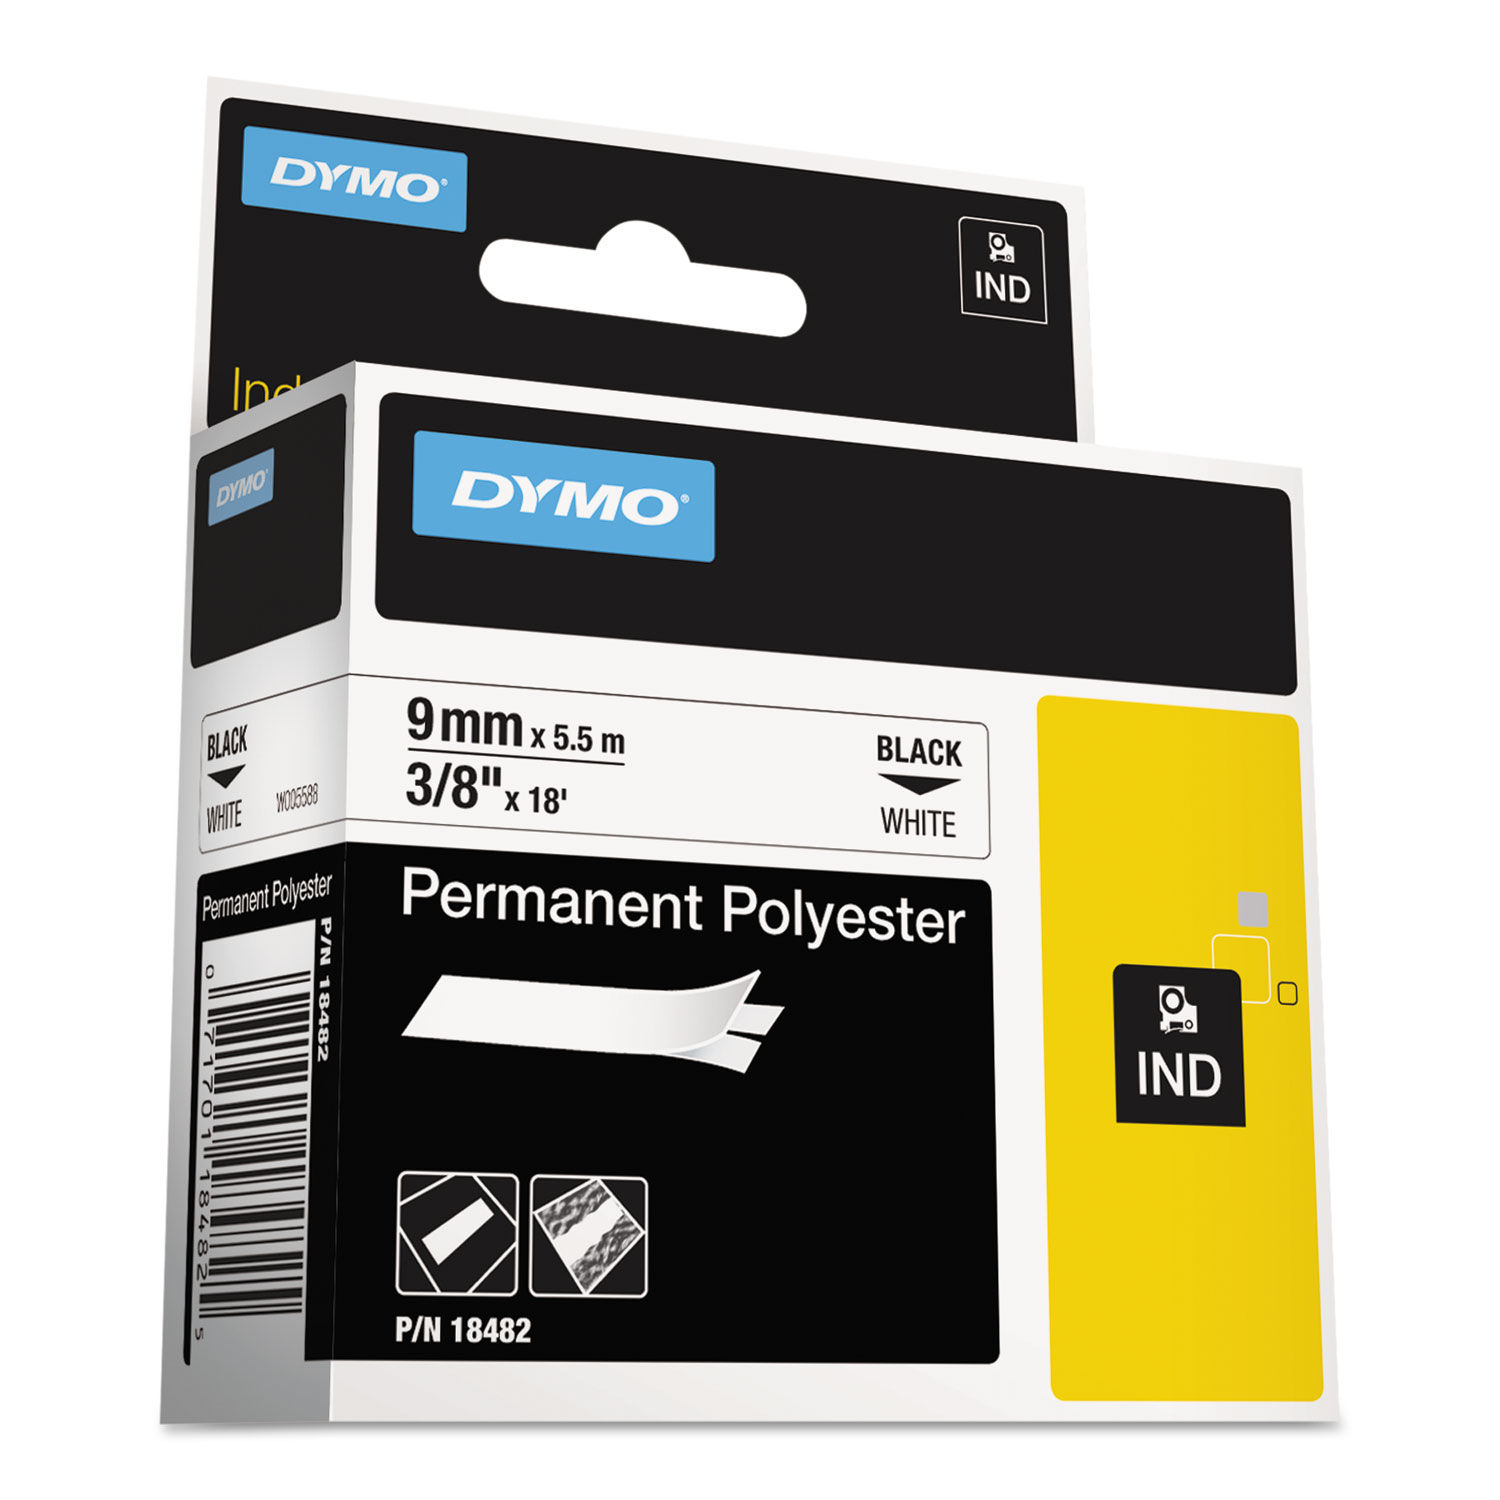 Rhino Permanent Poly Industrial Label Tape 0.37" x 18 ft, White/Black Print